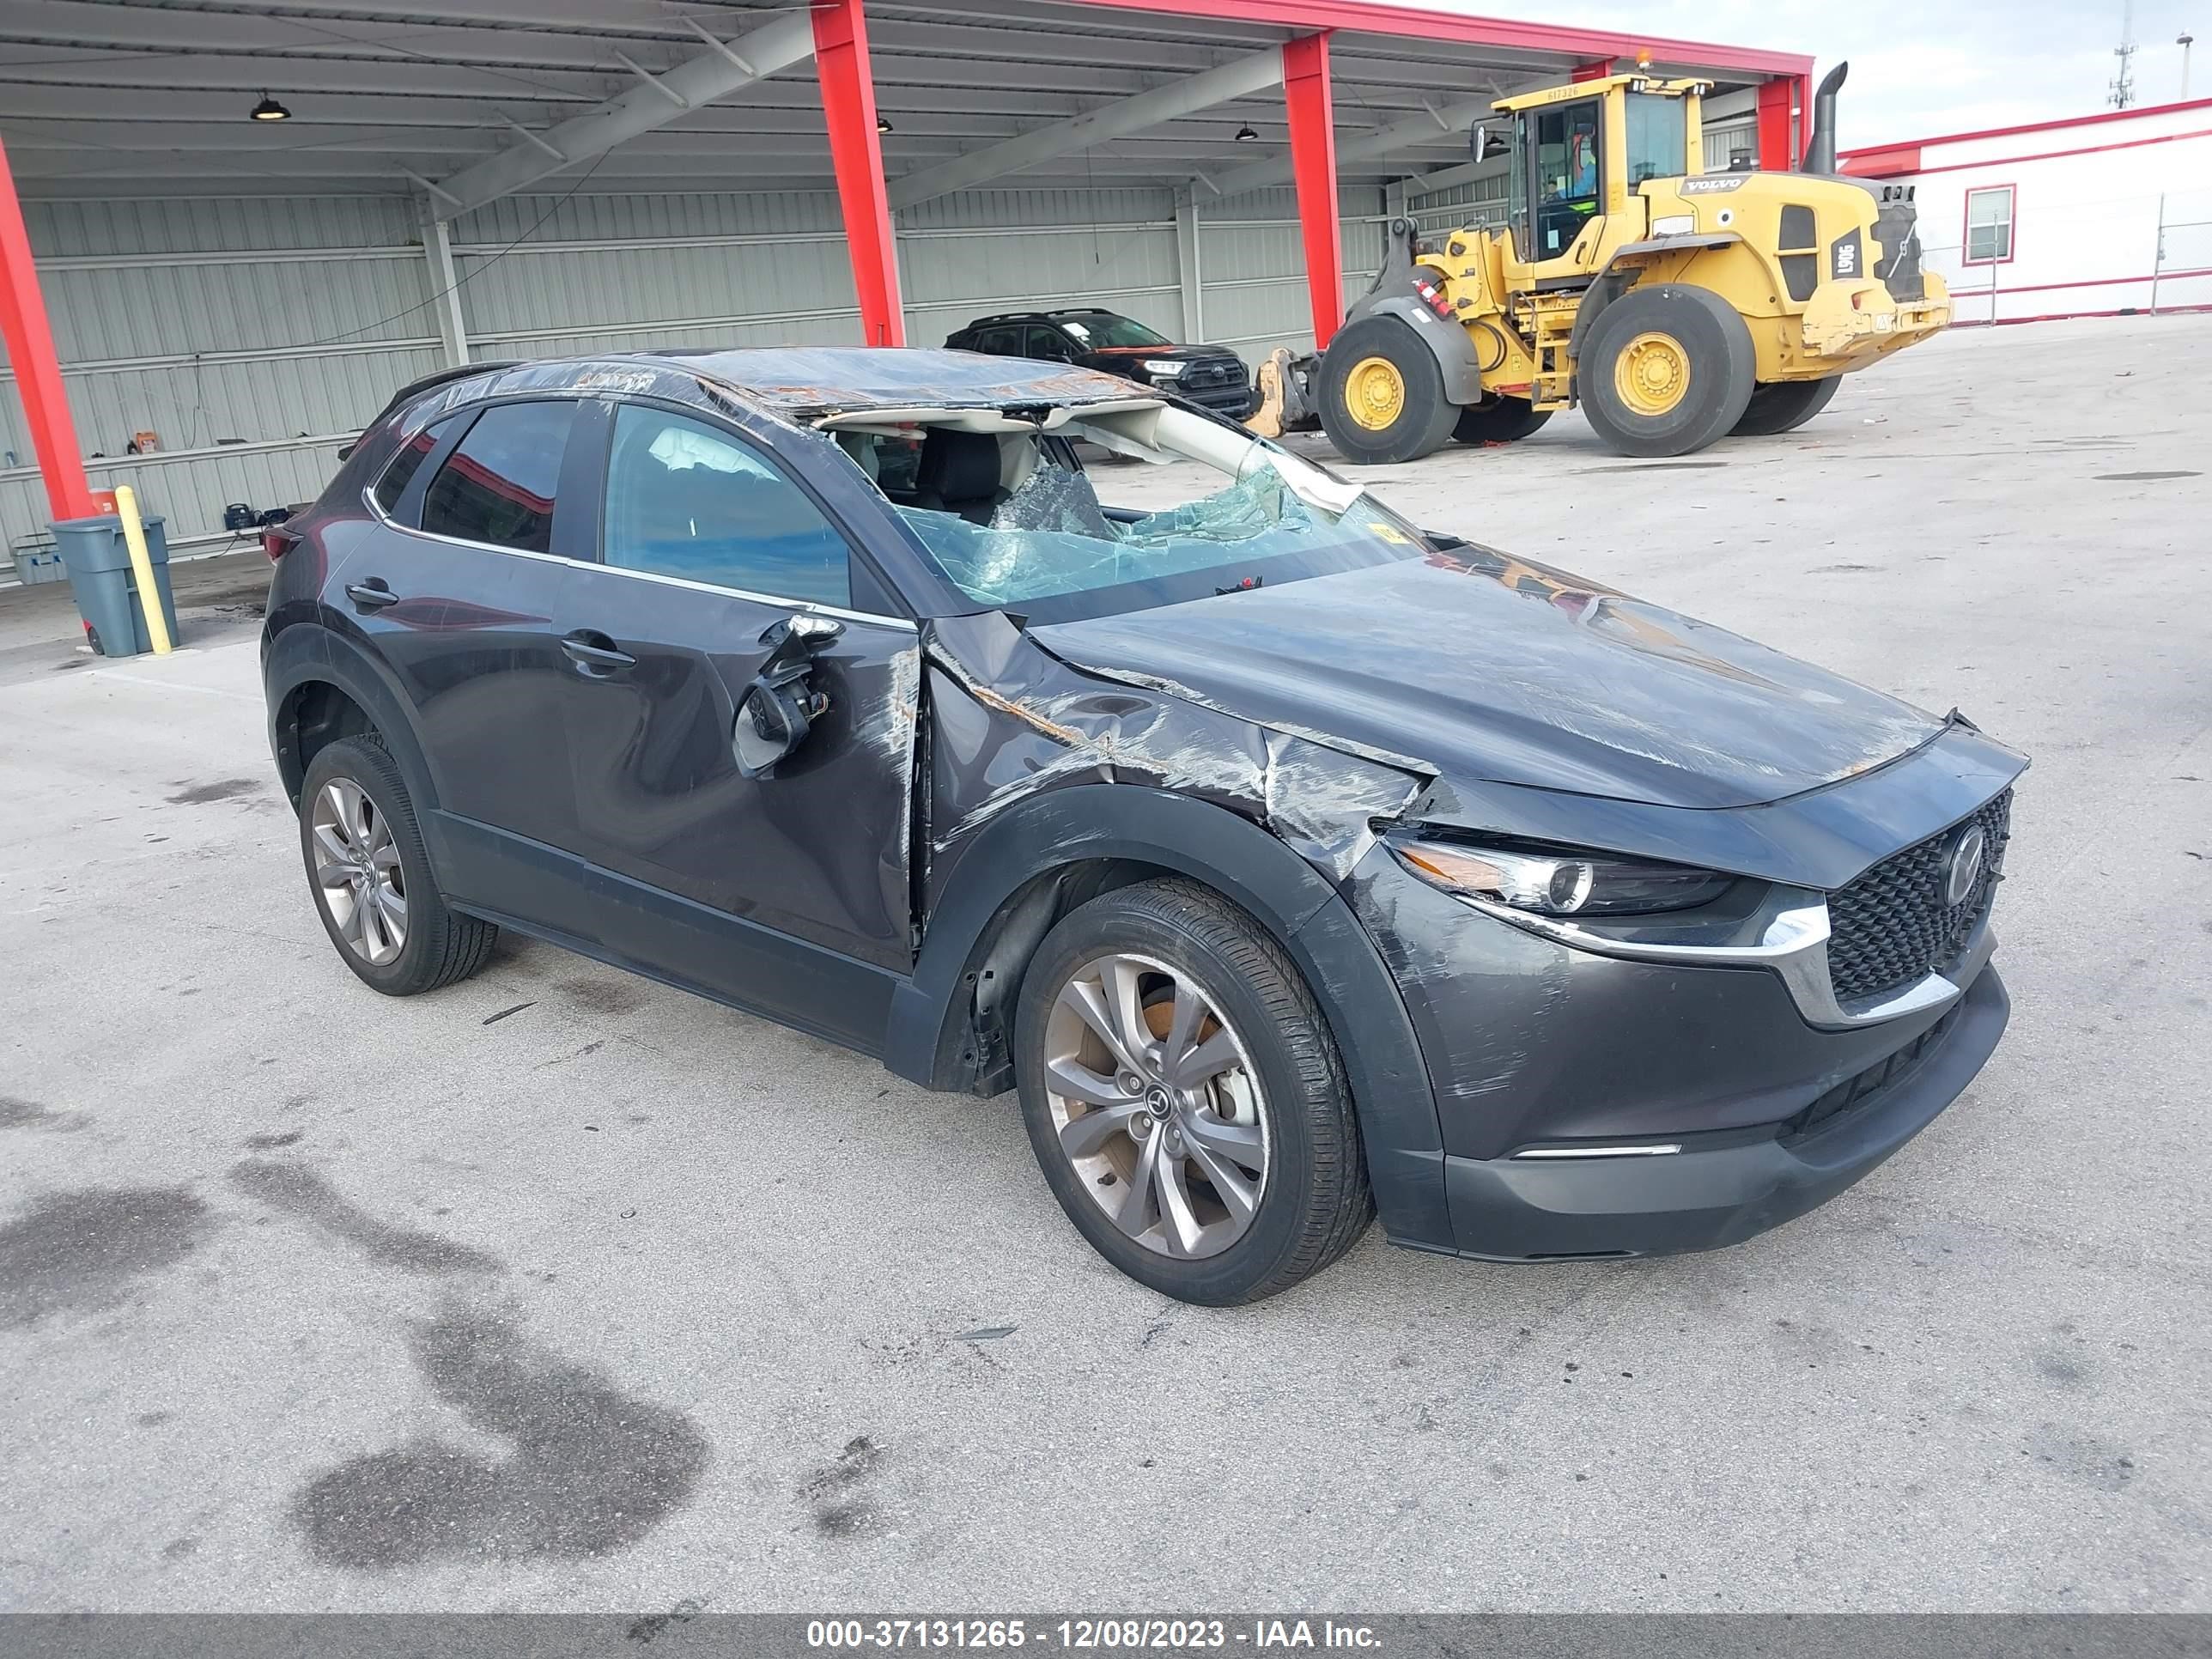 vin: 3MVDMACL4LM138027 3MVDMACL4LM138027 2020 mazda cx-30 2500 for Sale in 33332, 6275 Sw 196Th Ave, Pembroke Pines, Florida, USA